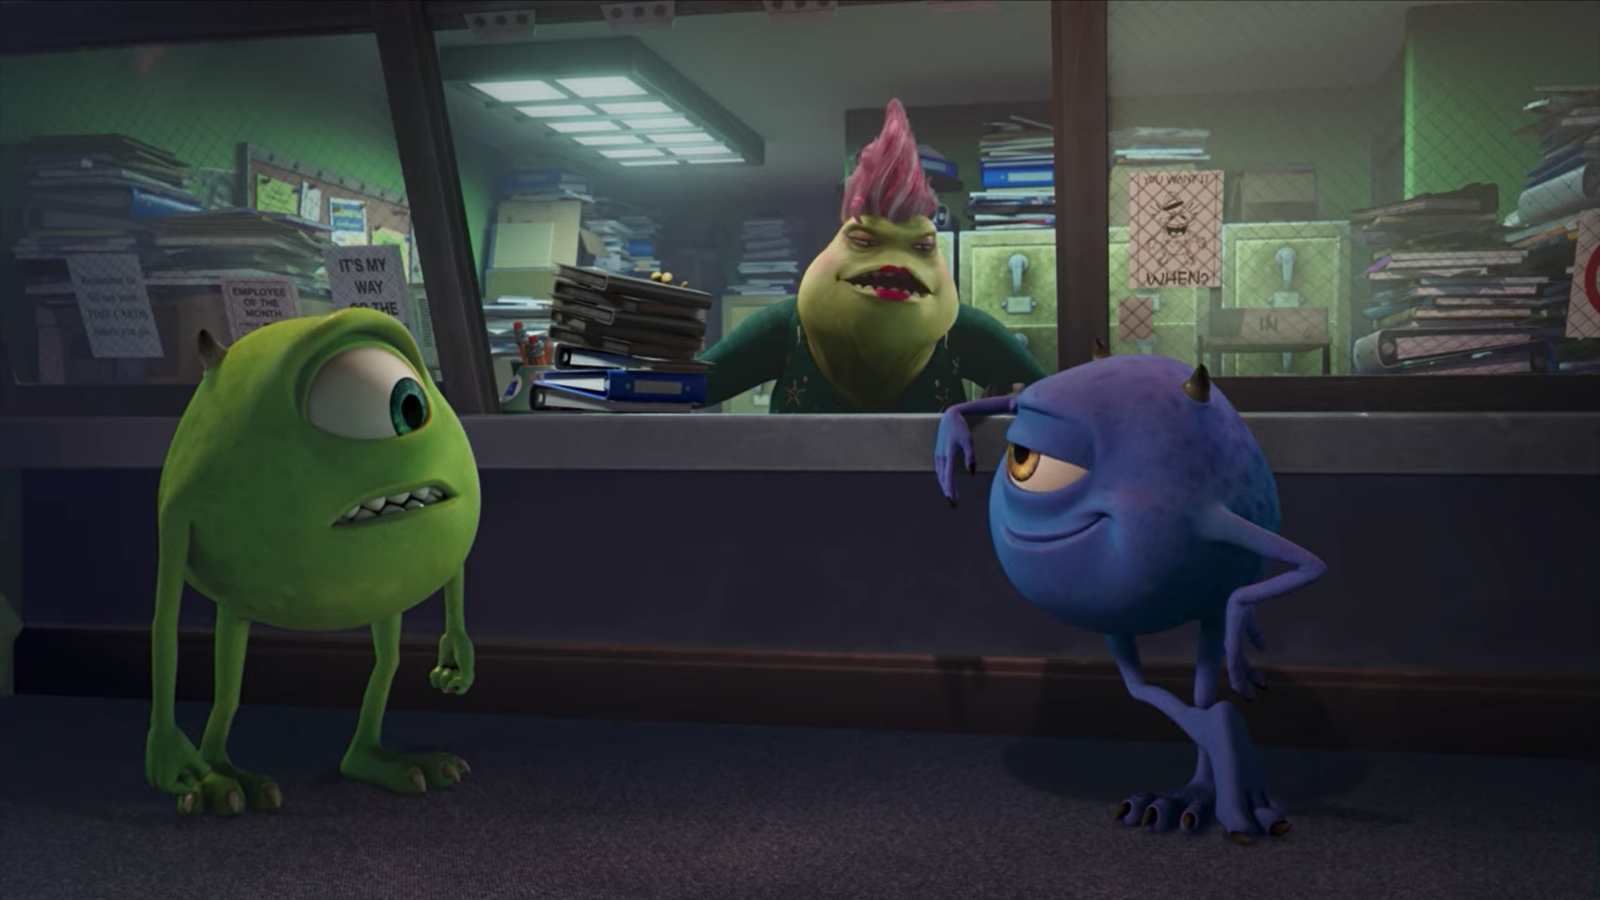 Look Closer: Monsters, Inc. Mike and Sulley to the Rescue! at